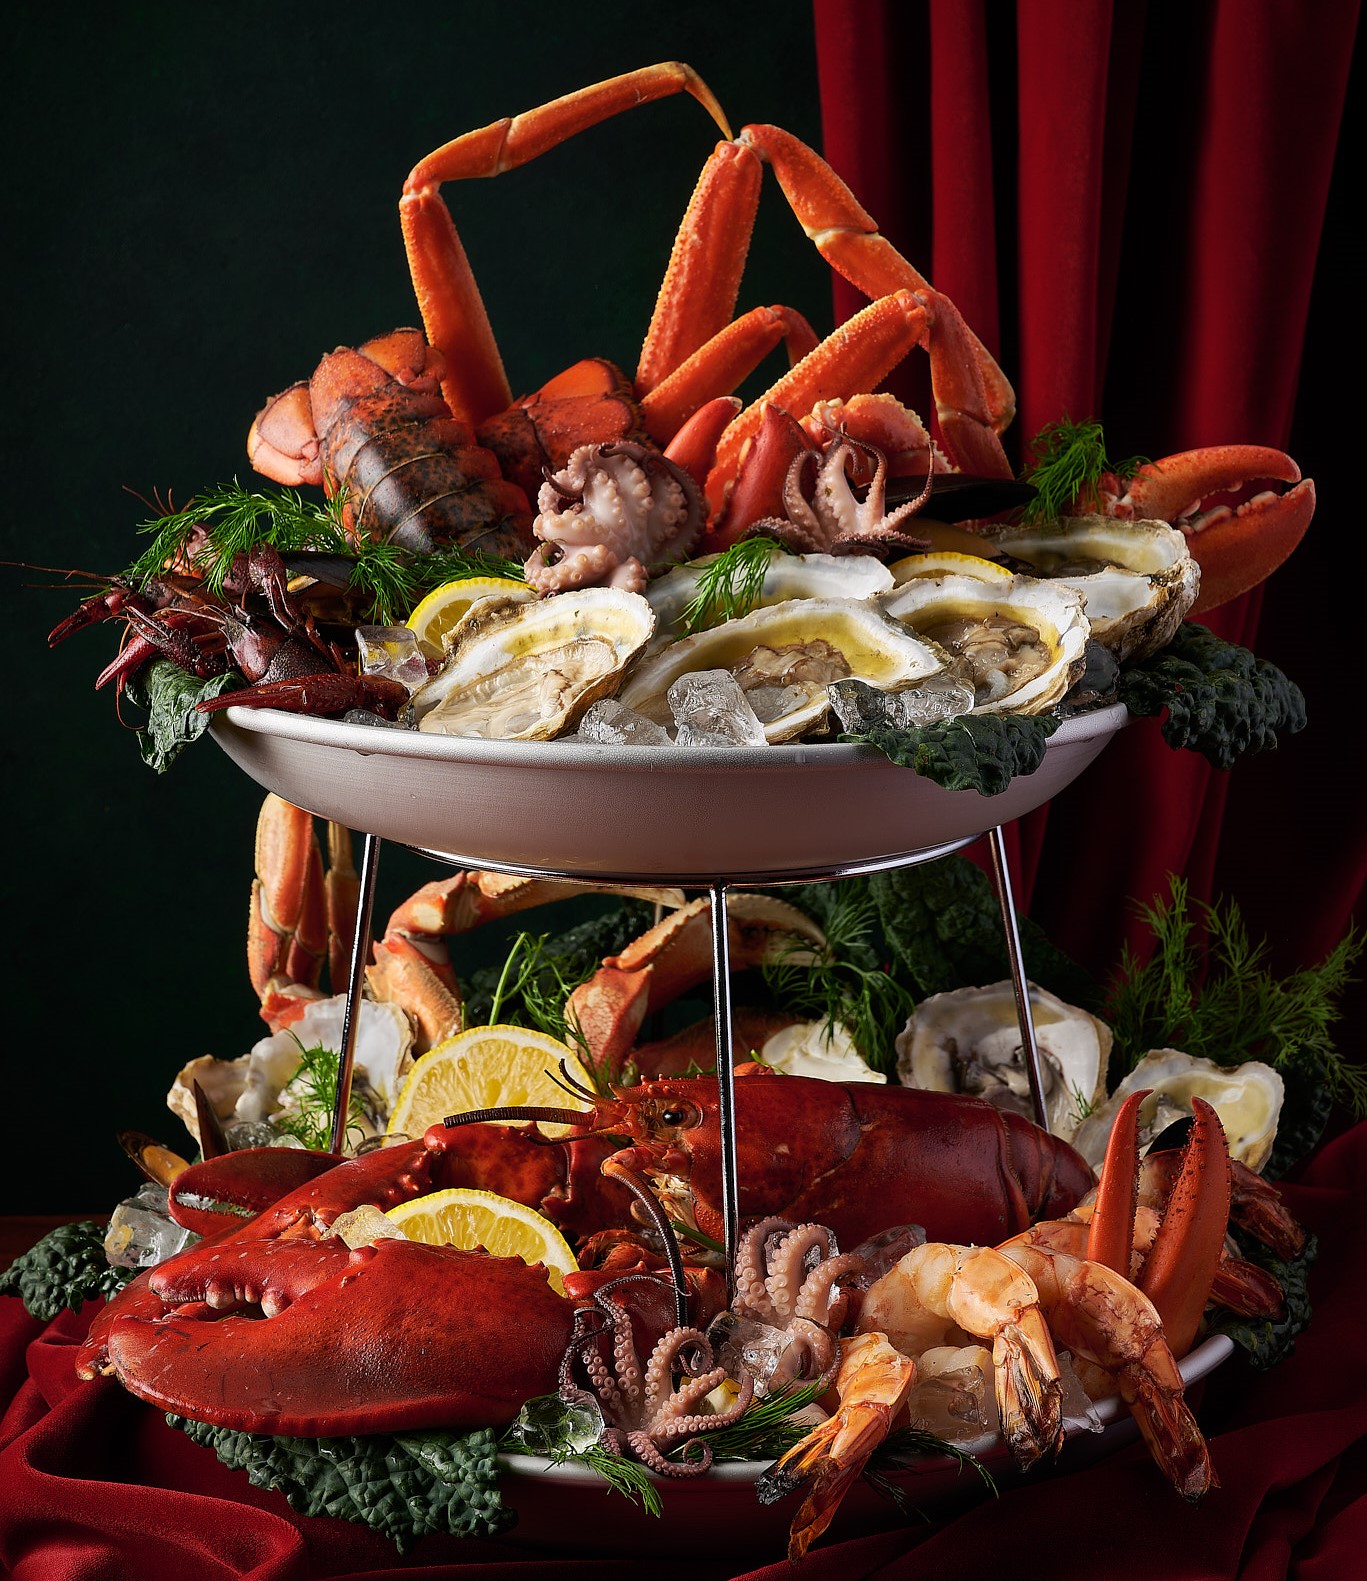 The Seafood Tower at Delmonico's restaurant.